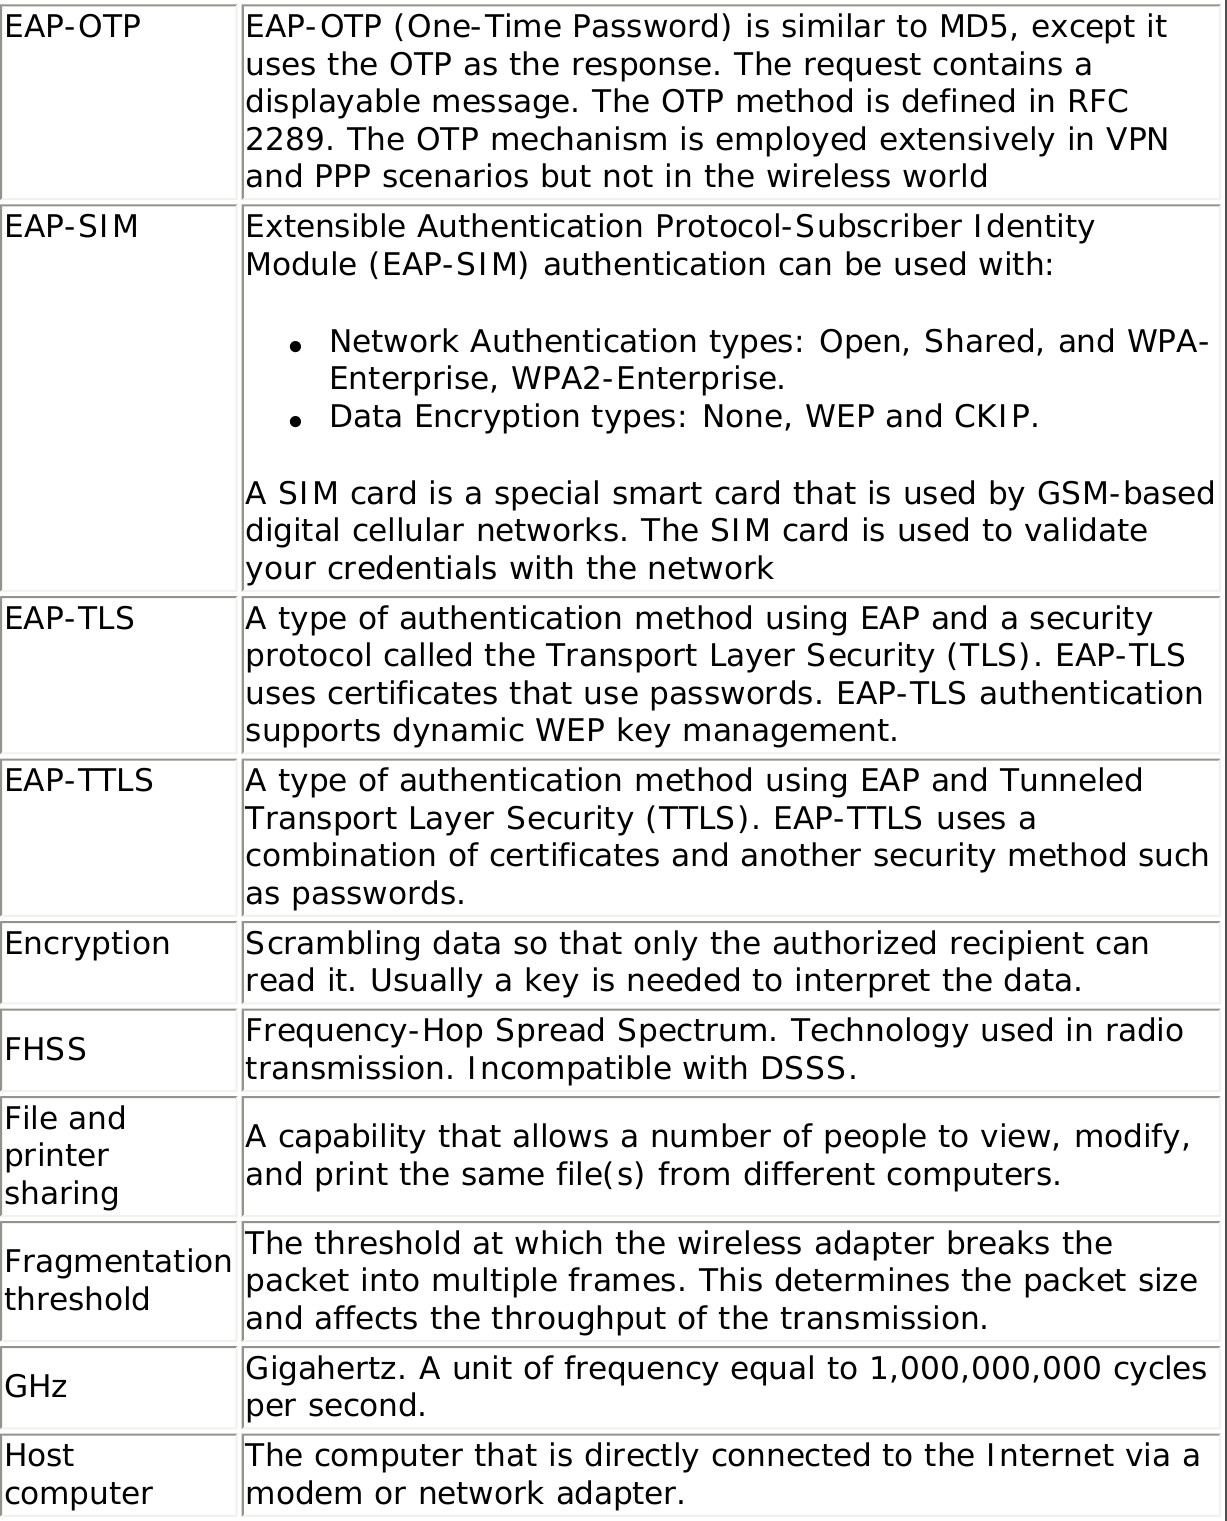 EAP-OTP EAP-OTP (One-Time Password) is similar to MD5, except it uses the OTP as the response. The request contains a displayable message. The OTP method is defined in RFC 2289. The OTP mechanism is employed extensively in VPN and PPP scenarios but not in the wireless worldEAP-SIM Extensible Authentication Protocol-Subscriber Identity Module (EAP-SIM) authentication can be used with: ●     Network Authentication types: Open, Shared, and WPA-Enterprise, WPA2-Enterprise. ●     Data Encryption types: None, WEP and CKIP. A SIM card is a special smart card that is used by GSM-based digital cellular networks. The SIM card is used to validate your credentials with the networkEAP-TLS A type of authentication method using EAP and a security protocol called the Transport Layer Security (TLS). EAP-TLS uses certificates that use passwords. EAP-TLS authentication supports dynamic WEP key management.EAP-TTLS A type of authentication method using EAP and Tunneled Transport Layer Security (TTLS). EAP-TTLS uses a combination of certificates and another security method such as passwords.Encryption Scrambling data so that only the authorized recipient can read it. Usually a key is needed to interpret the data.FHSS Frequency-Hop Spread Spectrum. Technology used in radio transmission. Incompatible with DSSS.File and printer sharingA capability that allows a number of people to view, modify, and print the same file(s) from different computers.Fragmentation thresholdThe threshold at which the wireless adapter breaks the packet into multiple frames. This determines the packet size and affects the throughput of the transmission.GHz Gigahertz. A unit of frequency equal to 1,000,000,000 cycles per second.Host computer The computer that is directly connected to the Internet via a modem or network adapter.